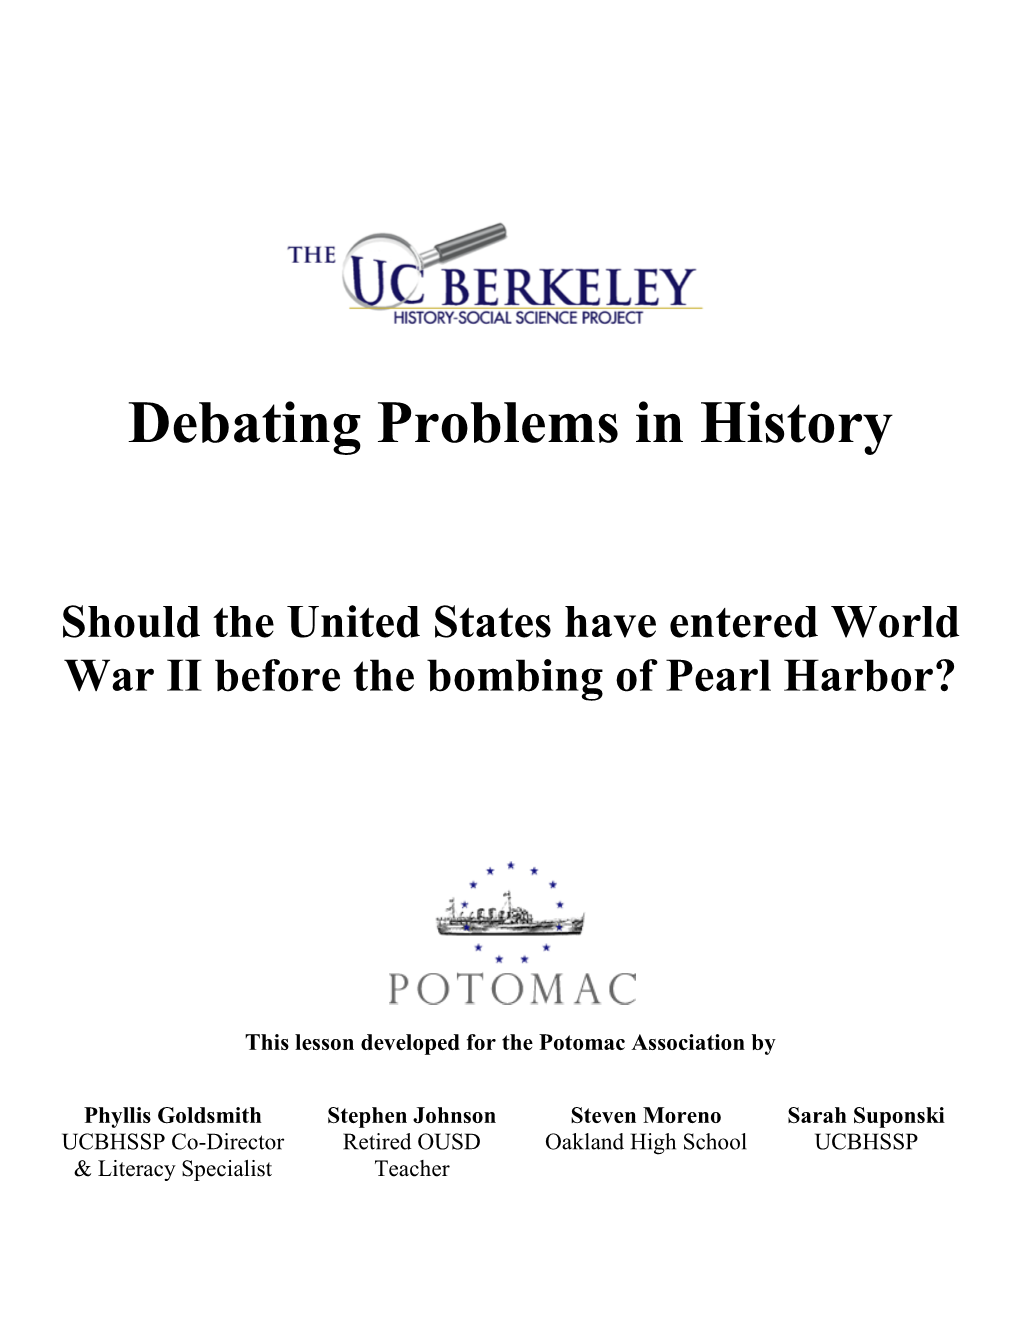 Structuring a Student Debate: Should the United States Enter World War II? (Prior to the Bombing of Pearl Harbor) A